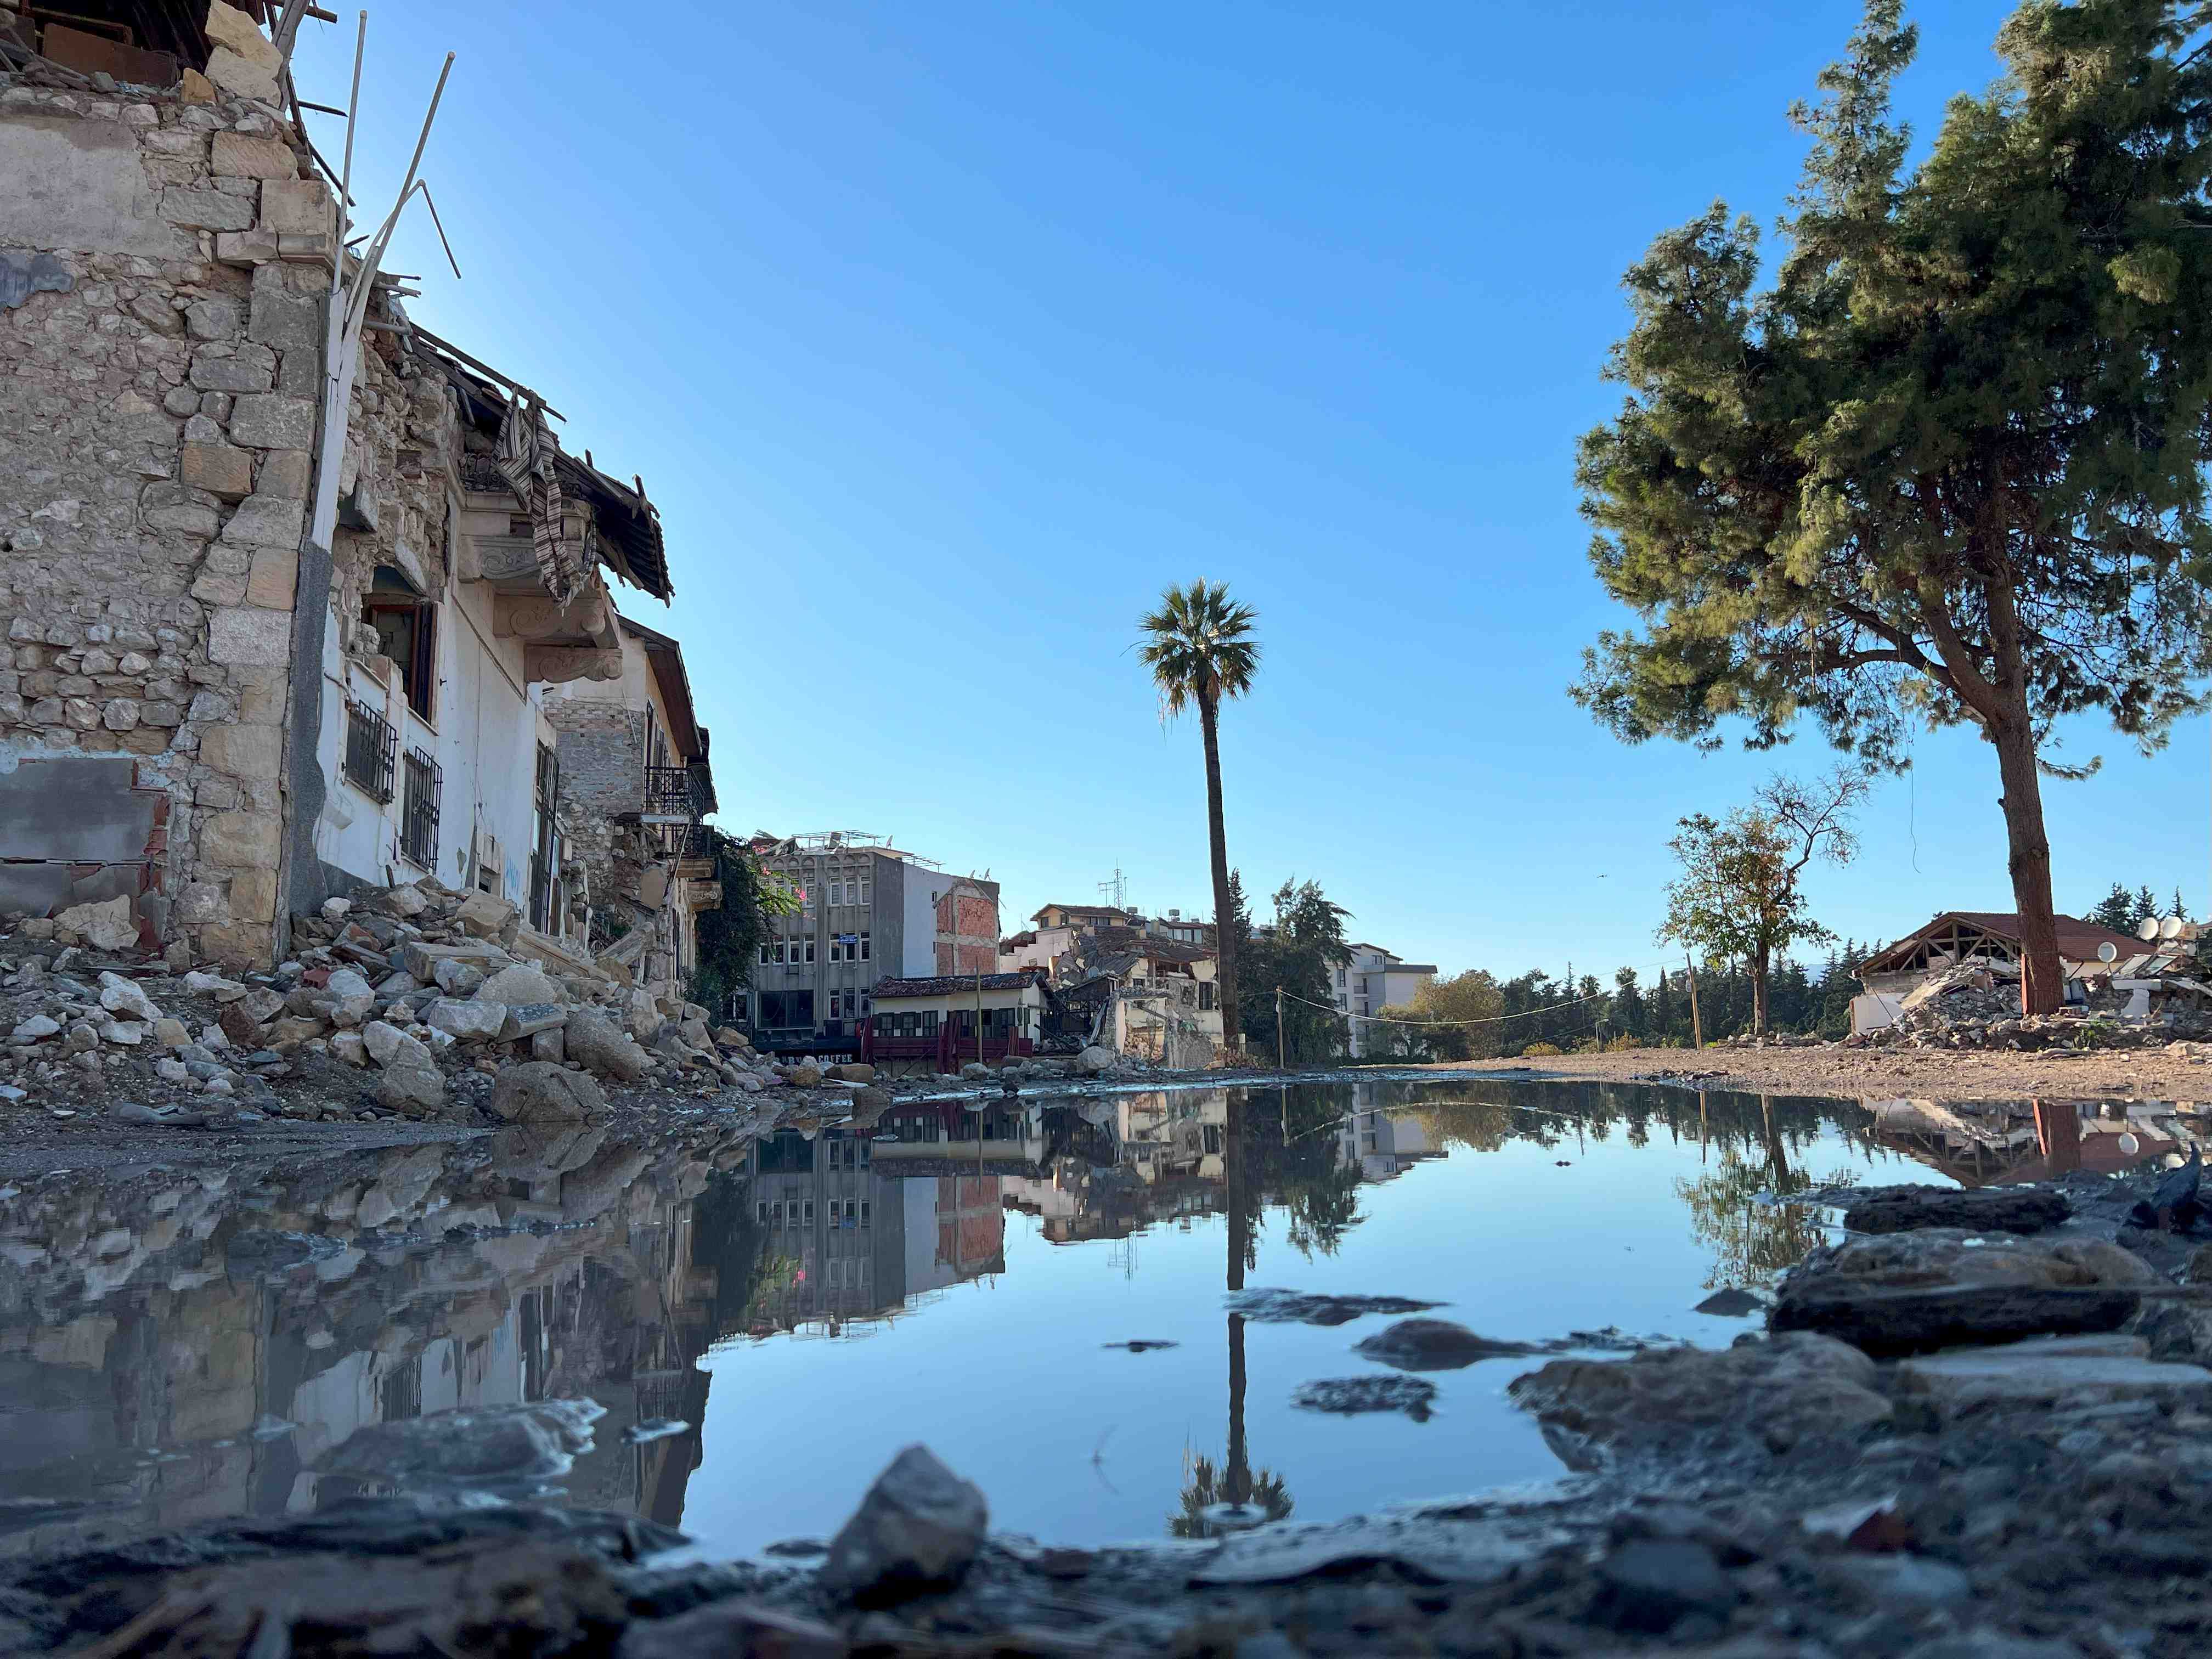 A puddle reflects a landscape of ruins and a palm tree